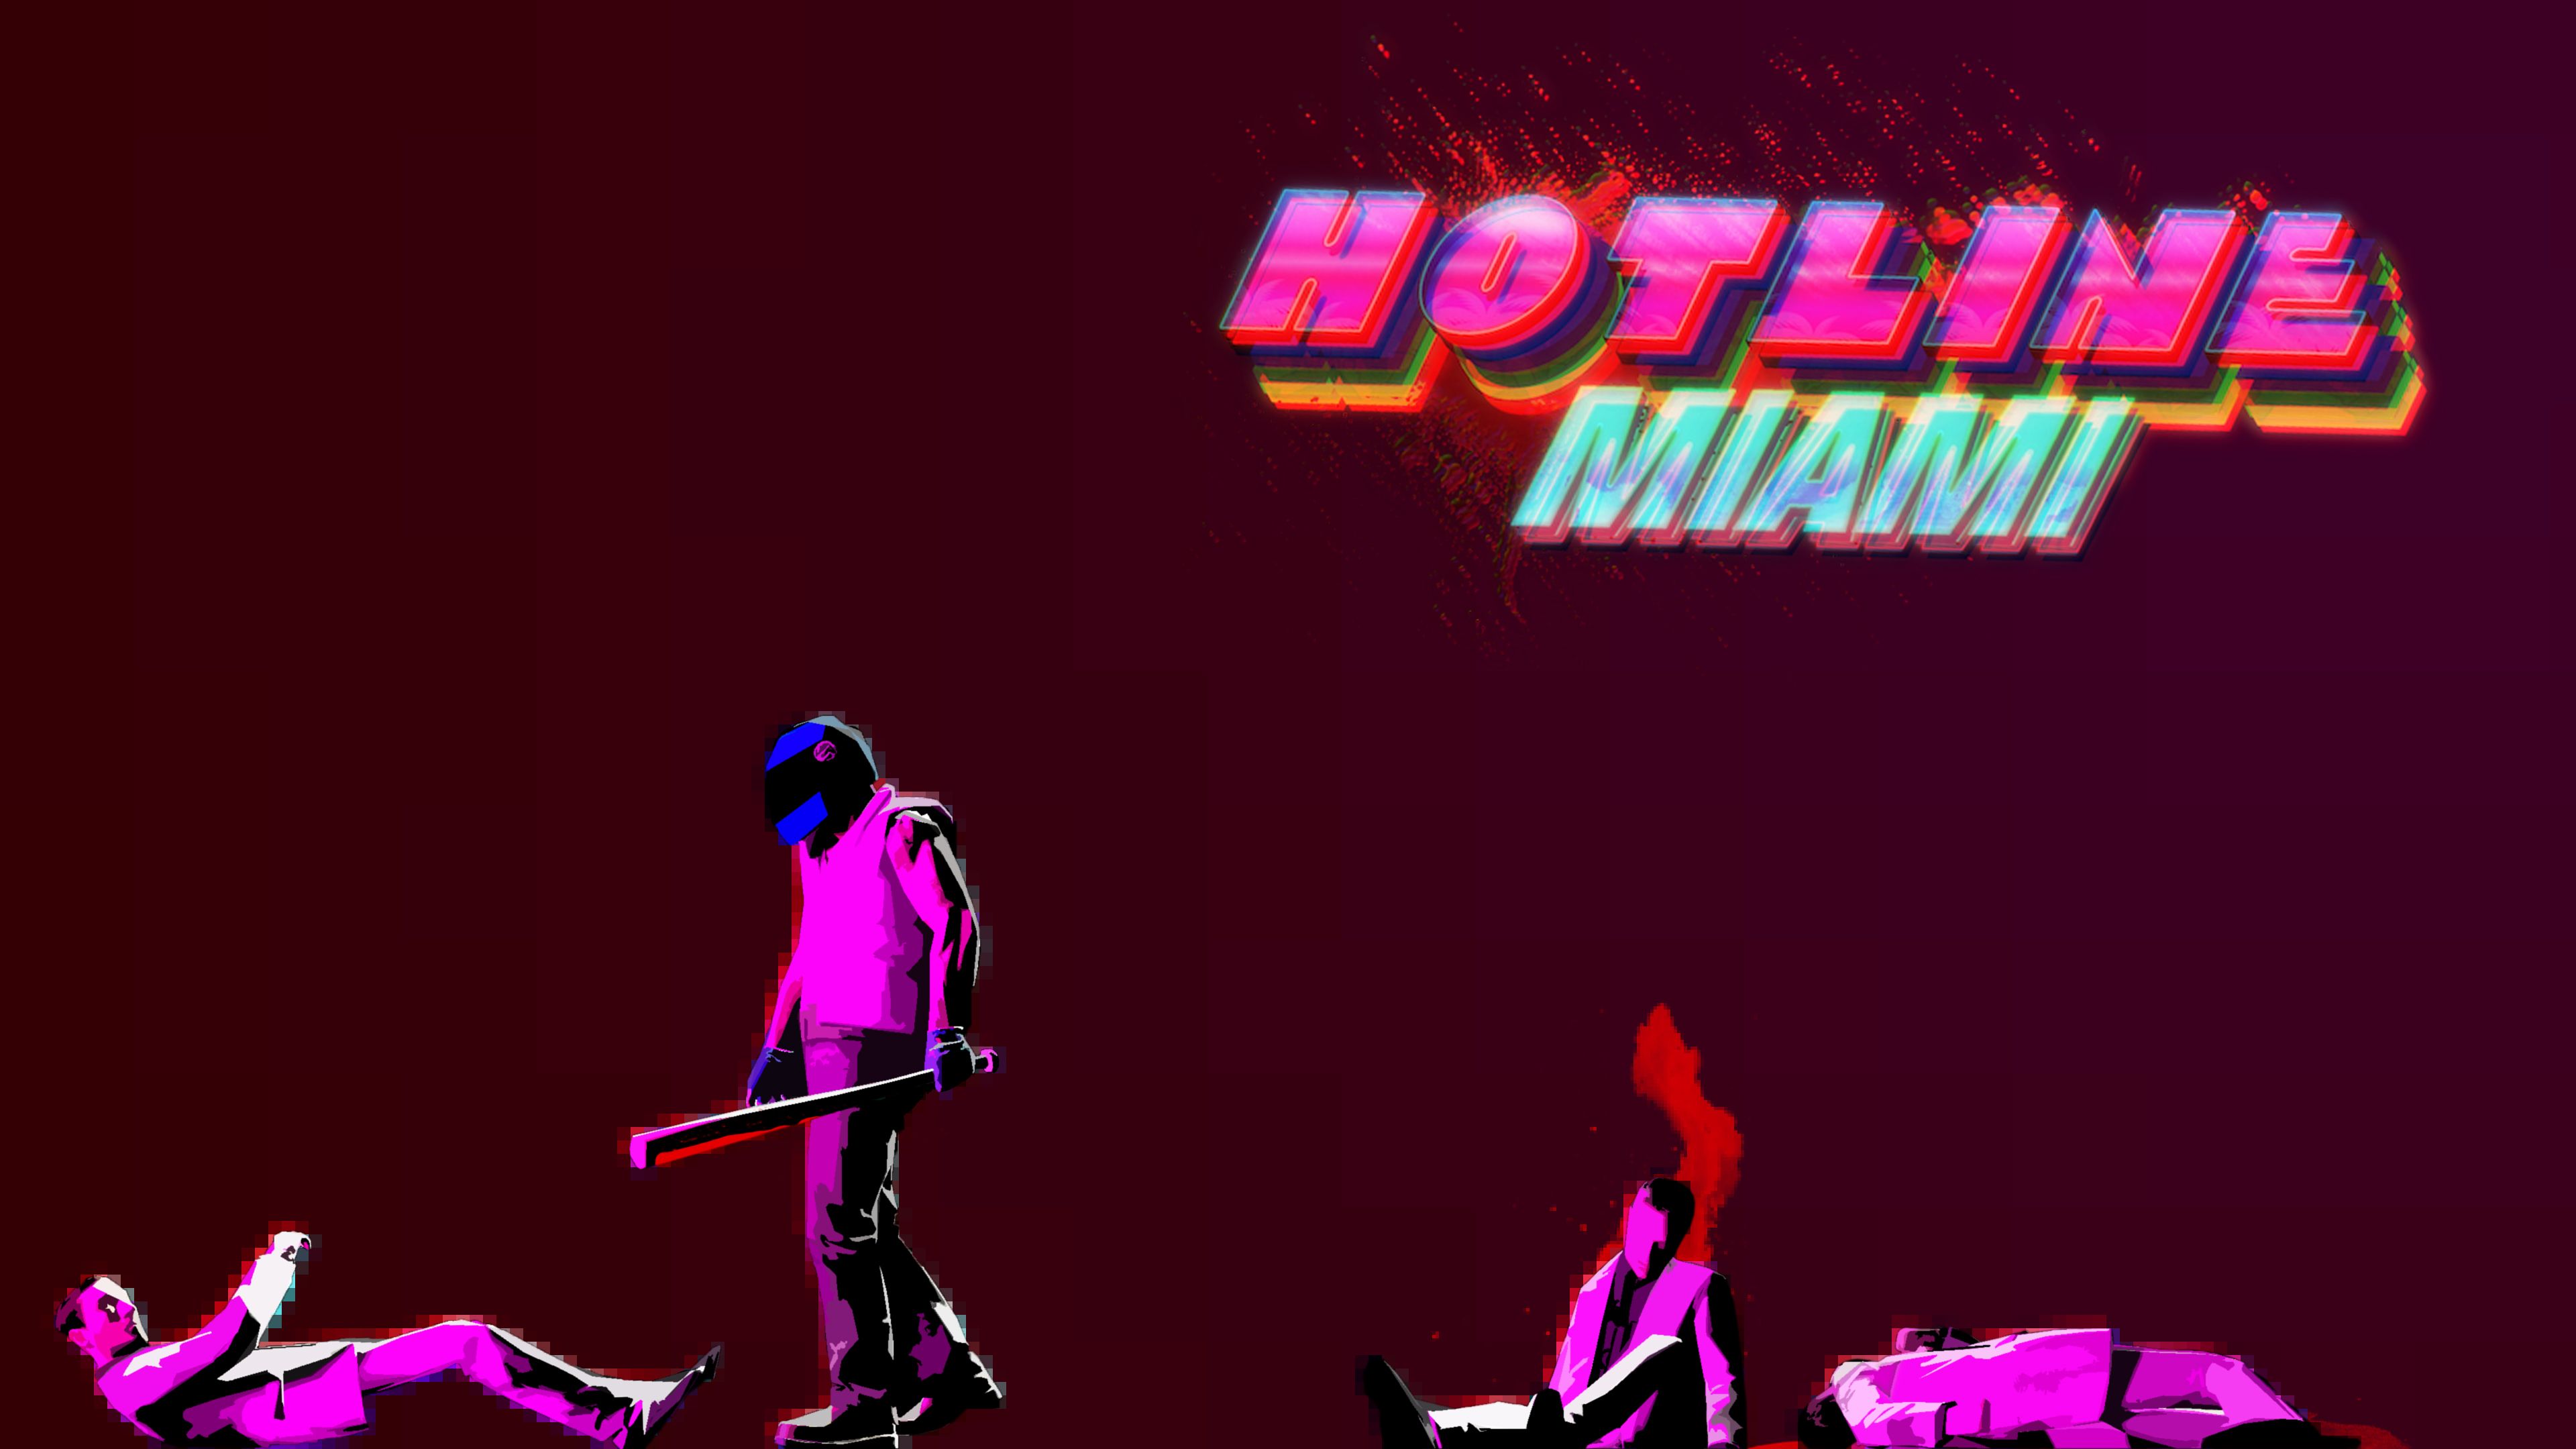 Hotline Miami HD Wallpapers and Backgrounds